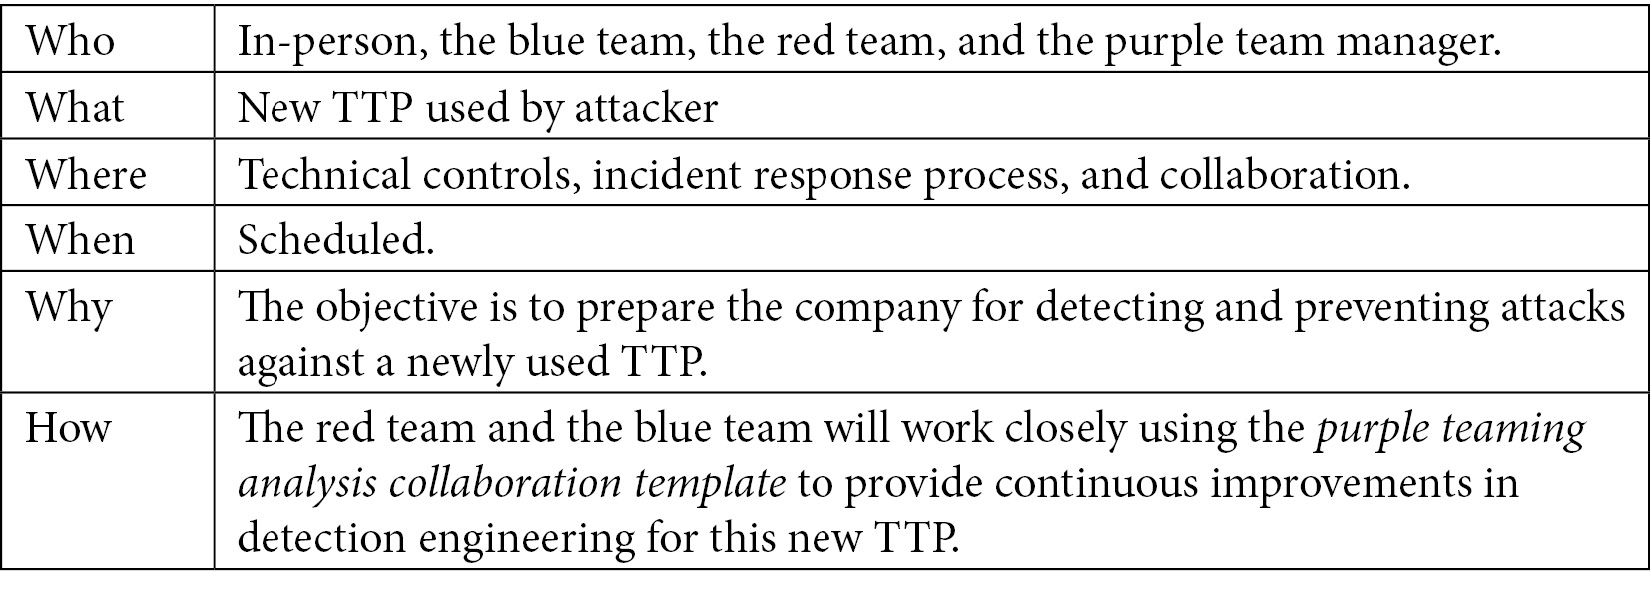 Table 2.6 – The five Ws and one H for the new TTP exercise
